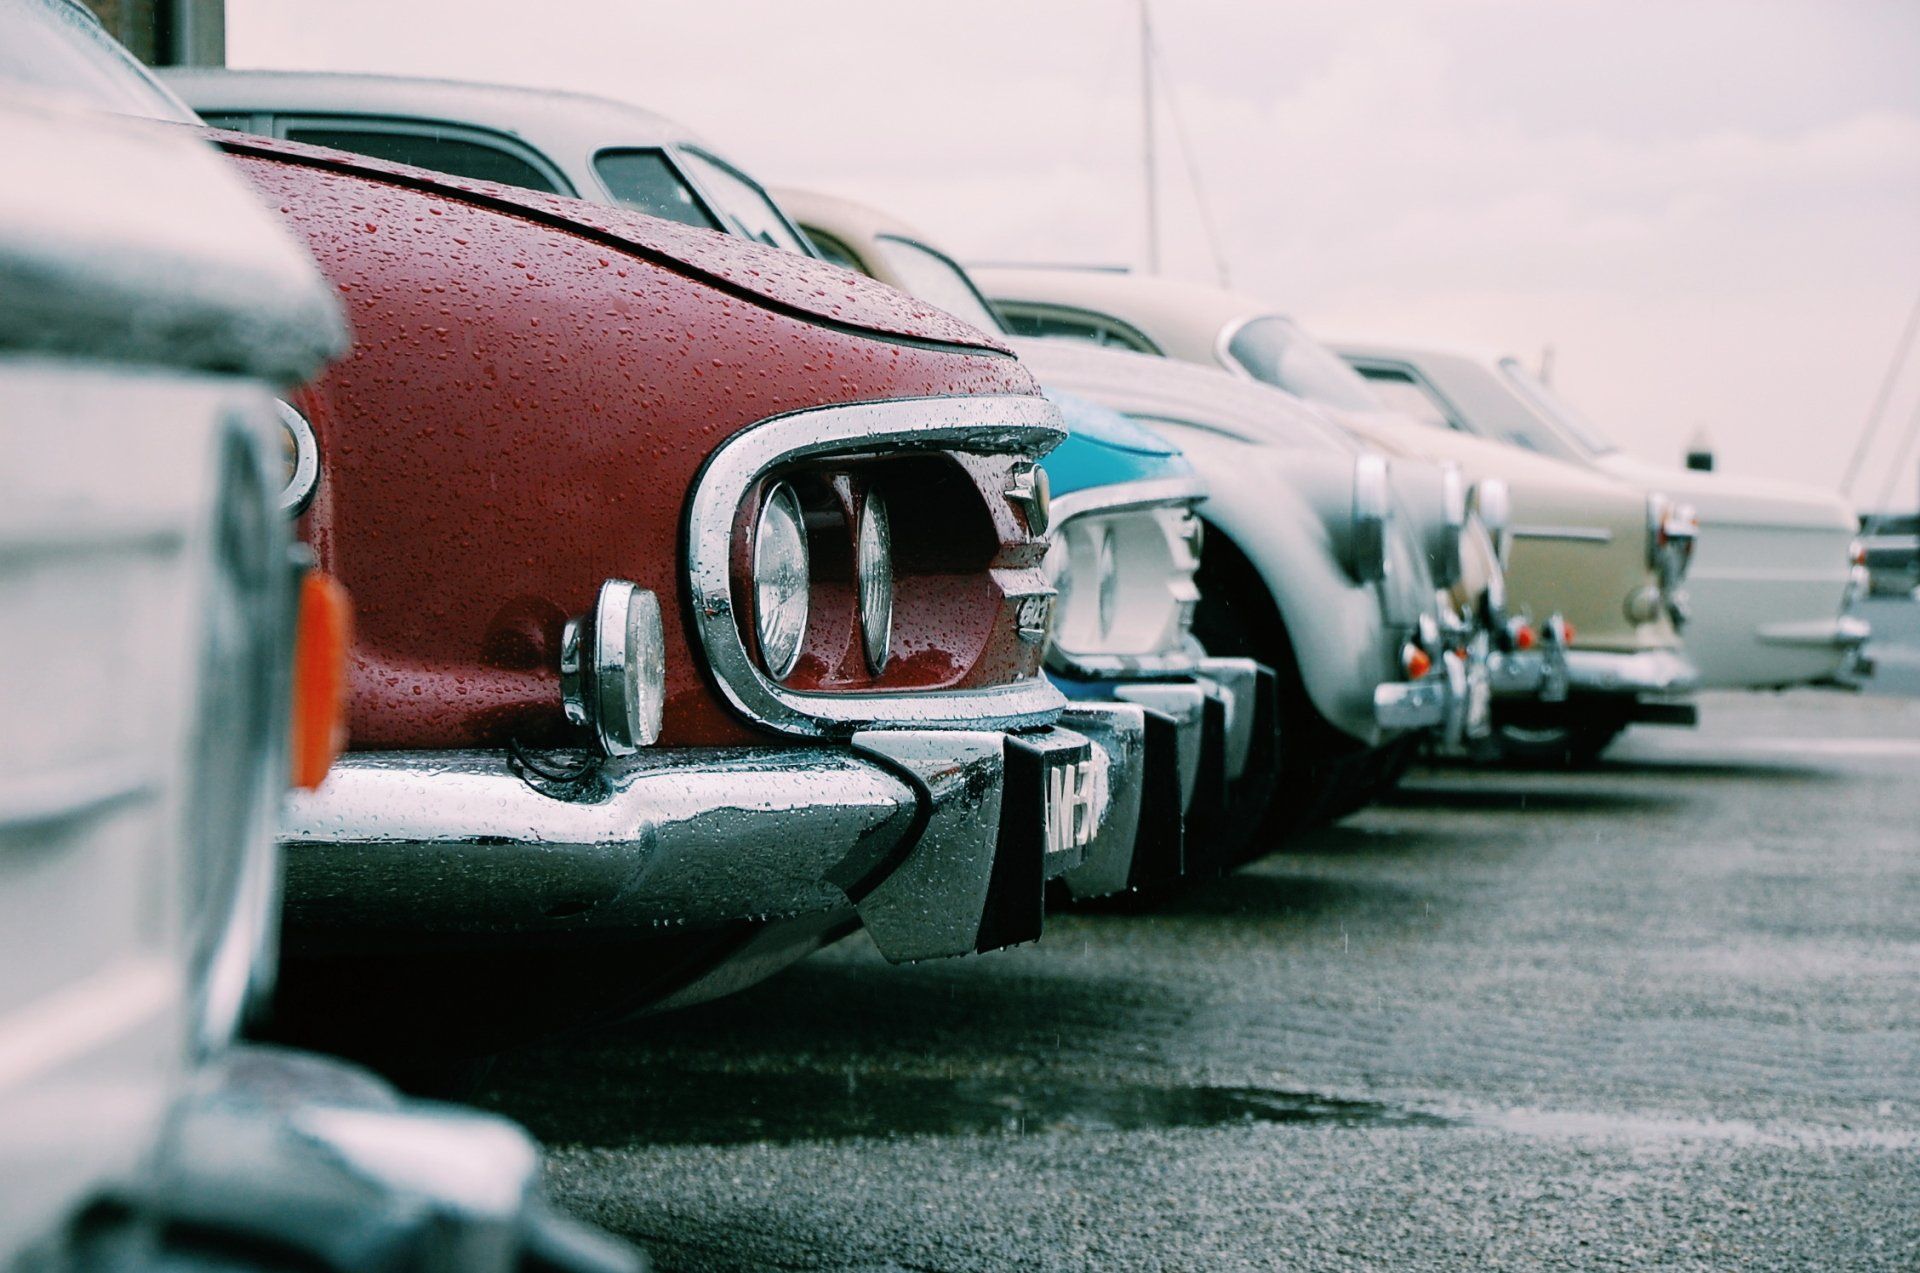 Tail view of seven vintage cars